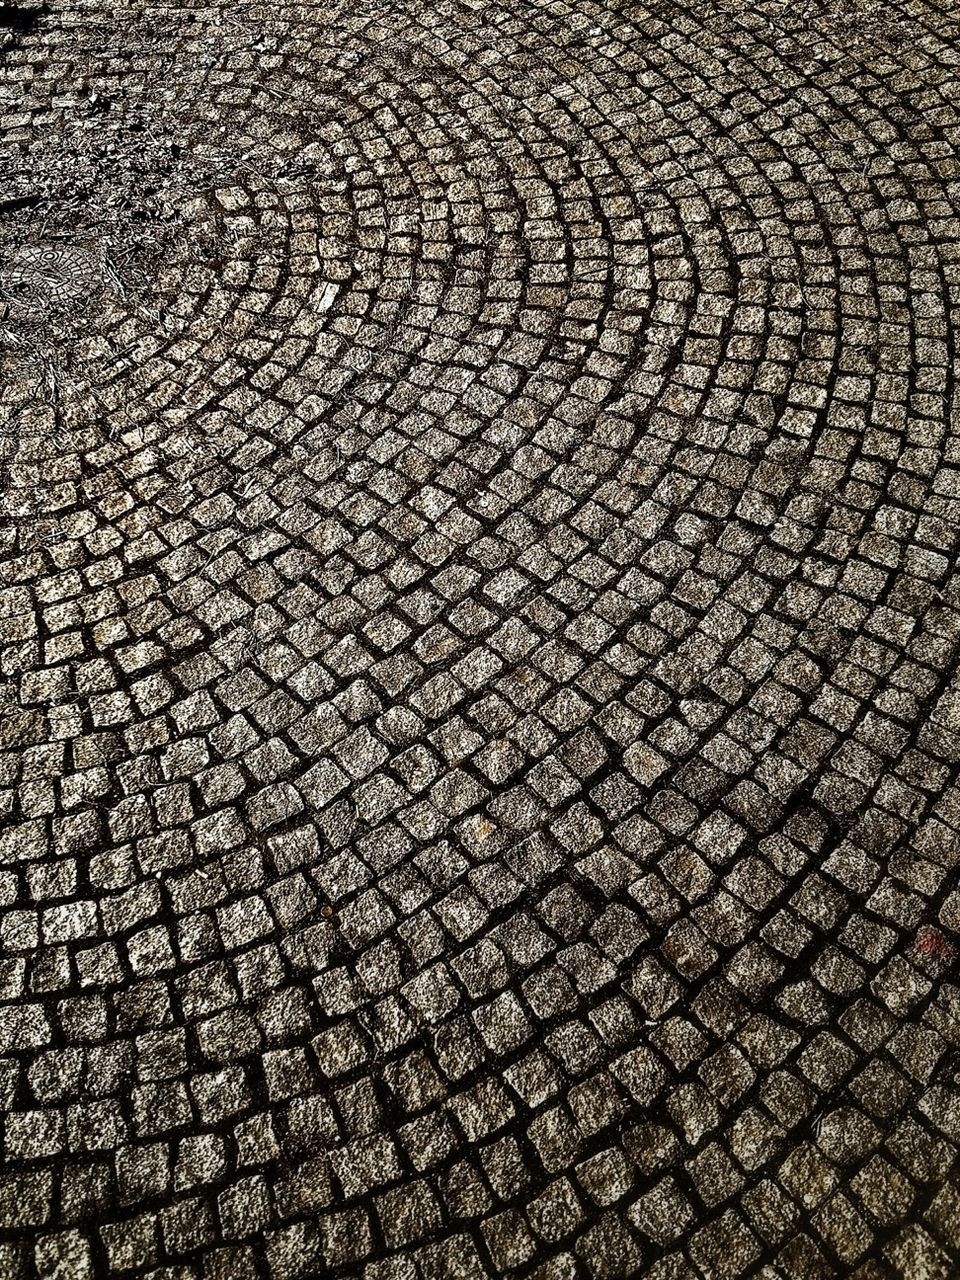 full frame, backgrounds, pattern, cobblestone, textured, high angle view, street, paving stone, repetition, day, outdoors, no people, design, footpath, stone - object, sunlight, close-up, in a row, road, geometric shape